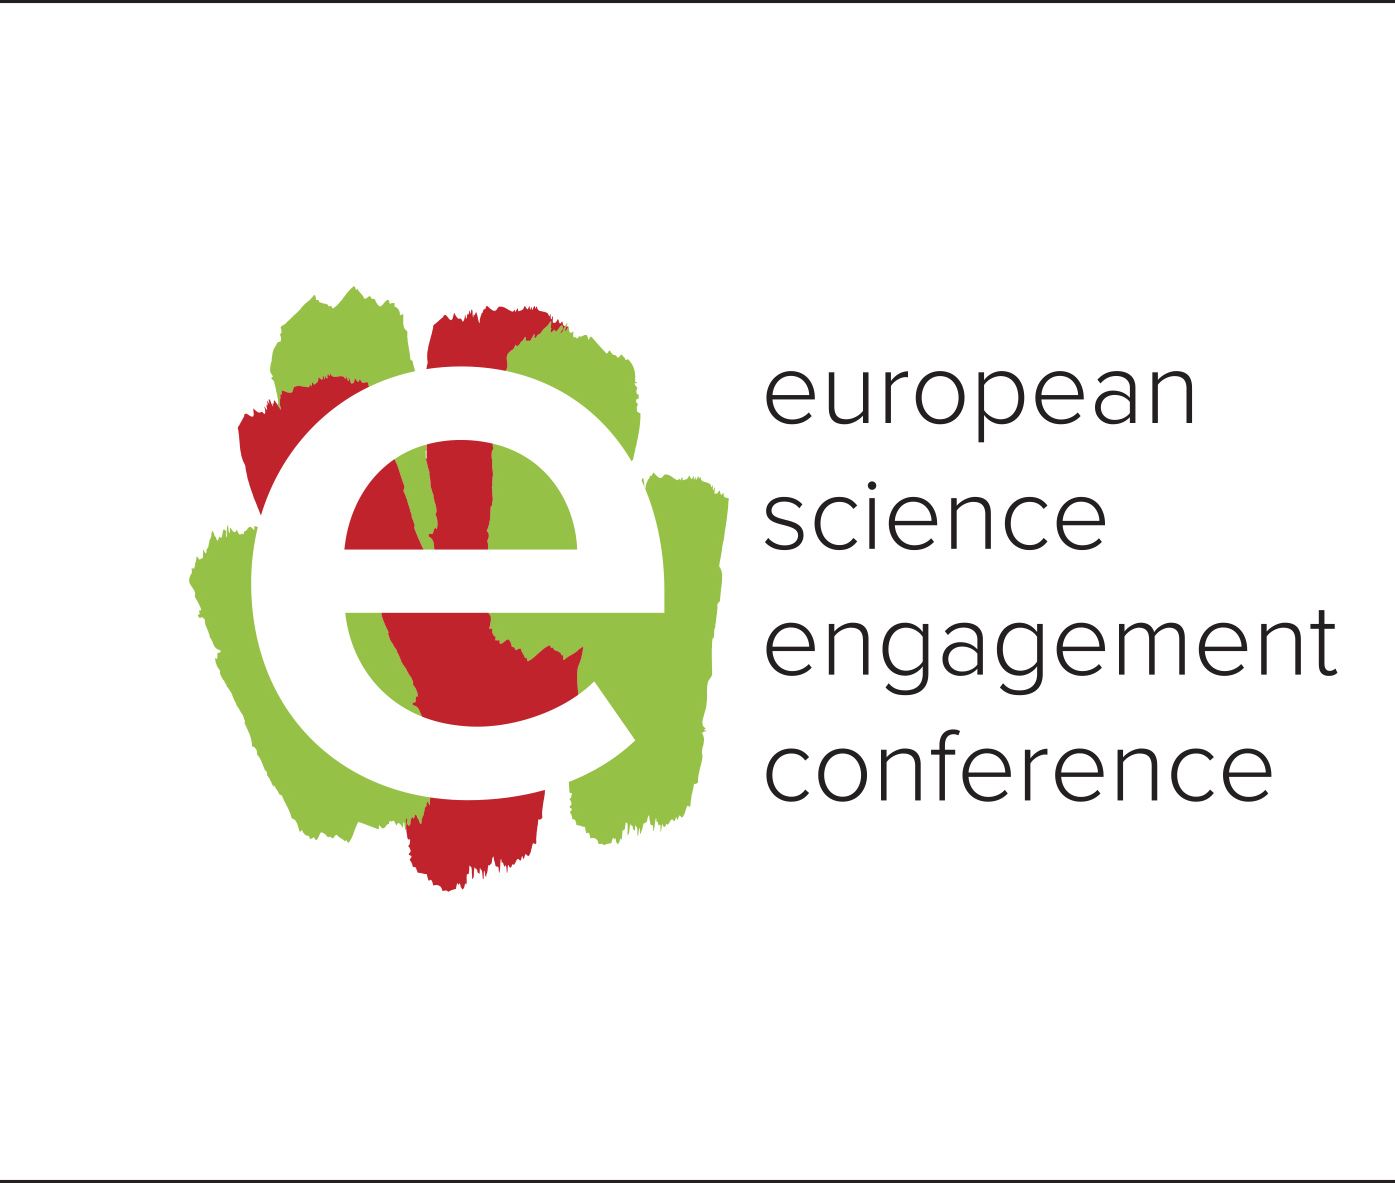 EUROPEAN SCIENCE ENGAGEMENT CONFERENCE